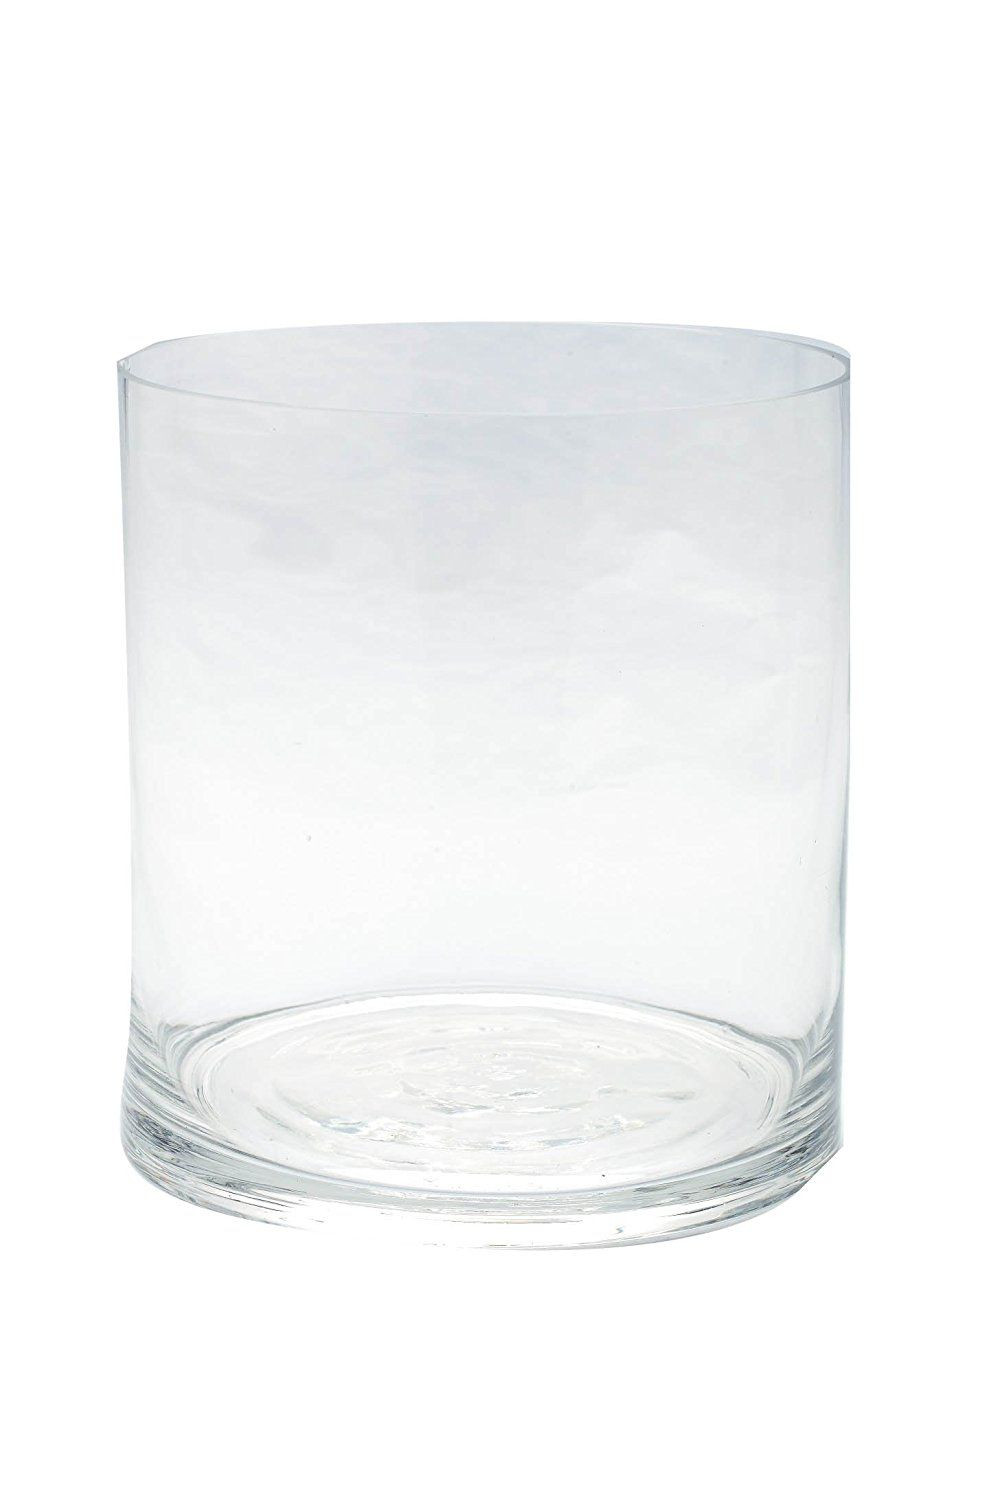 17 Ideal 6 X 12 Glass Cylinder Vase 2024 free download 6 x 12 glass cylinder vase of diamond star glass 84010c clear cylinder 9 by 10 want inside diamond star glass 84010c clear cylinder 9 by 10 want